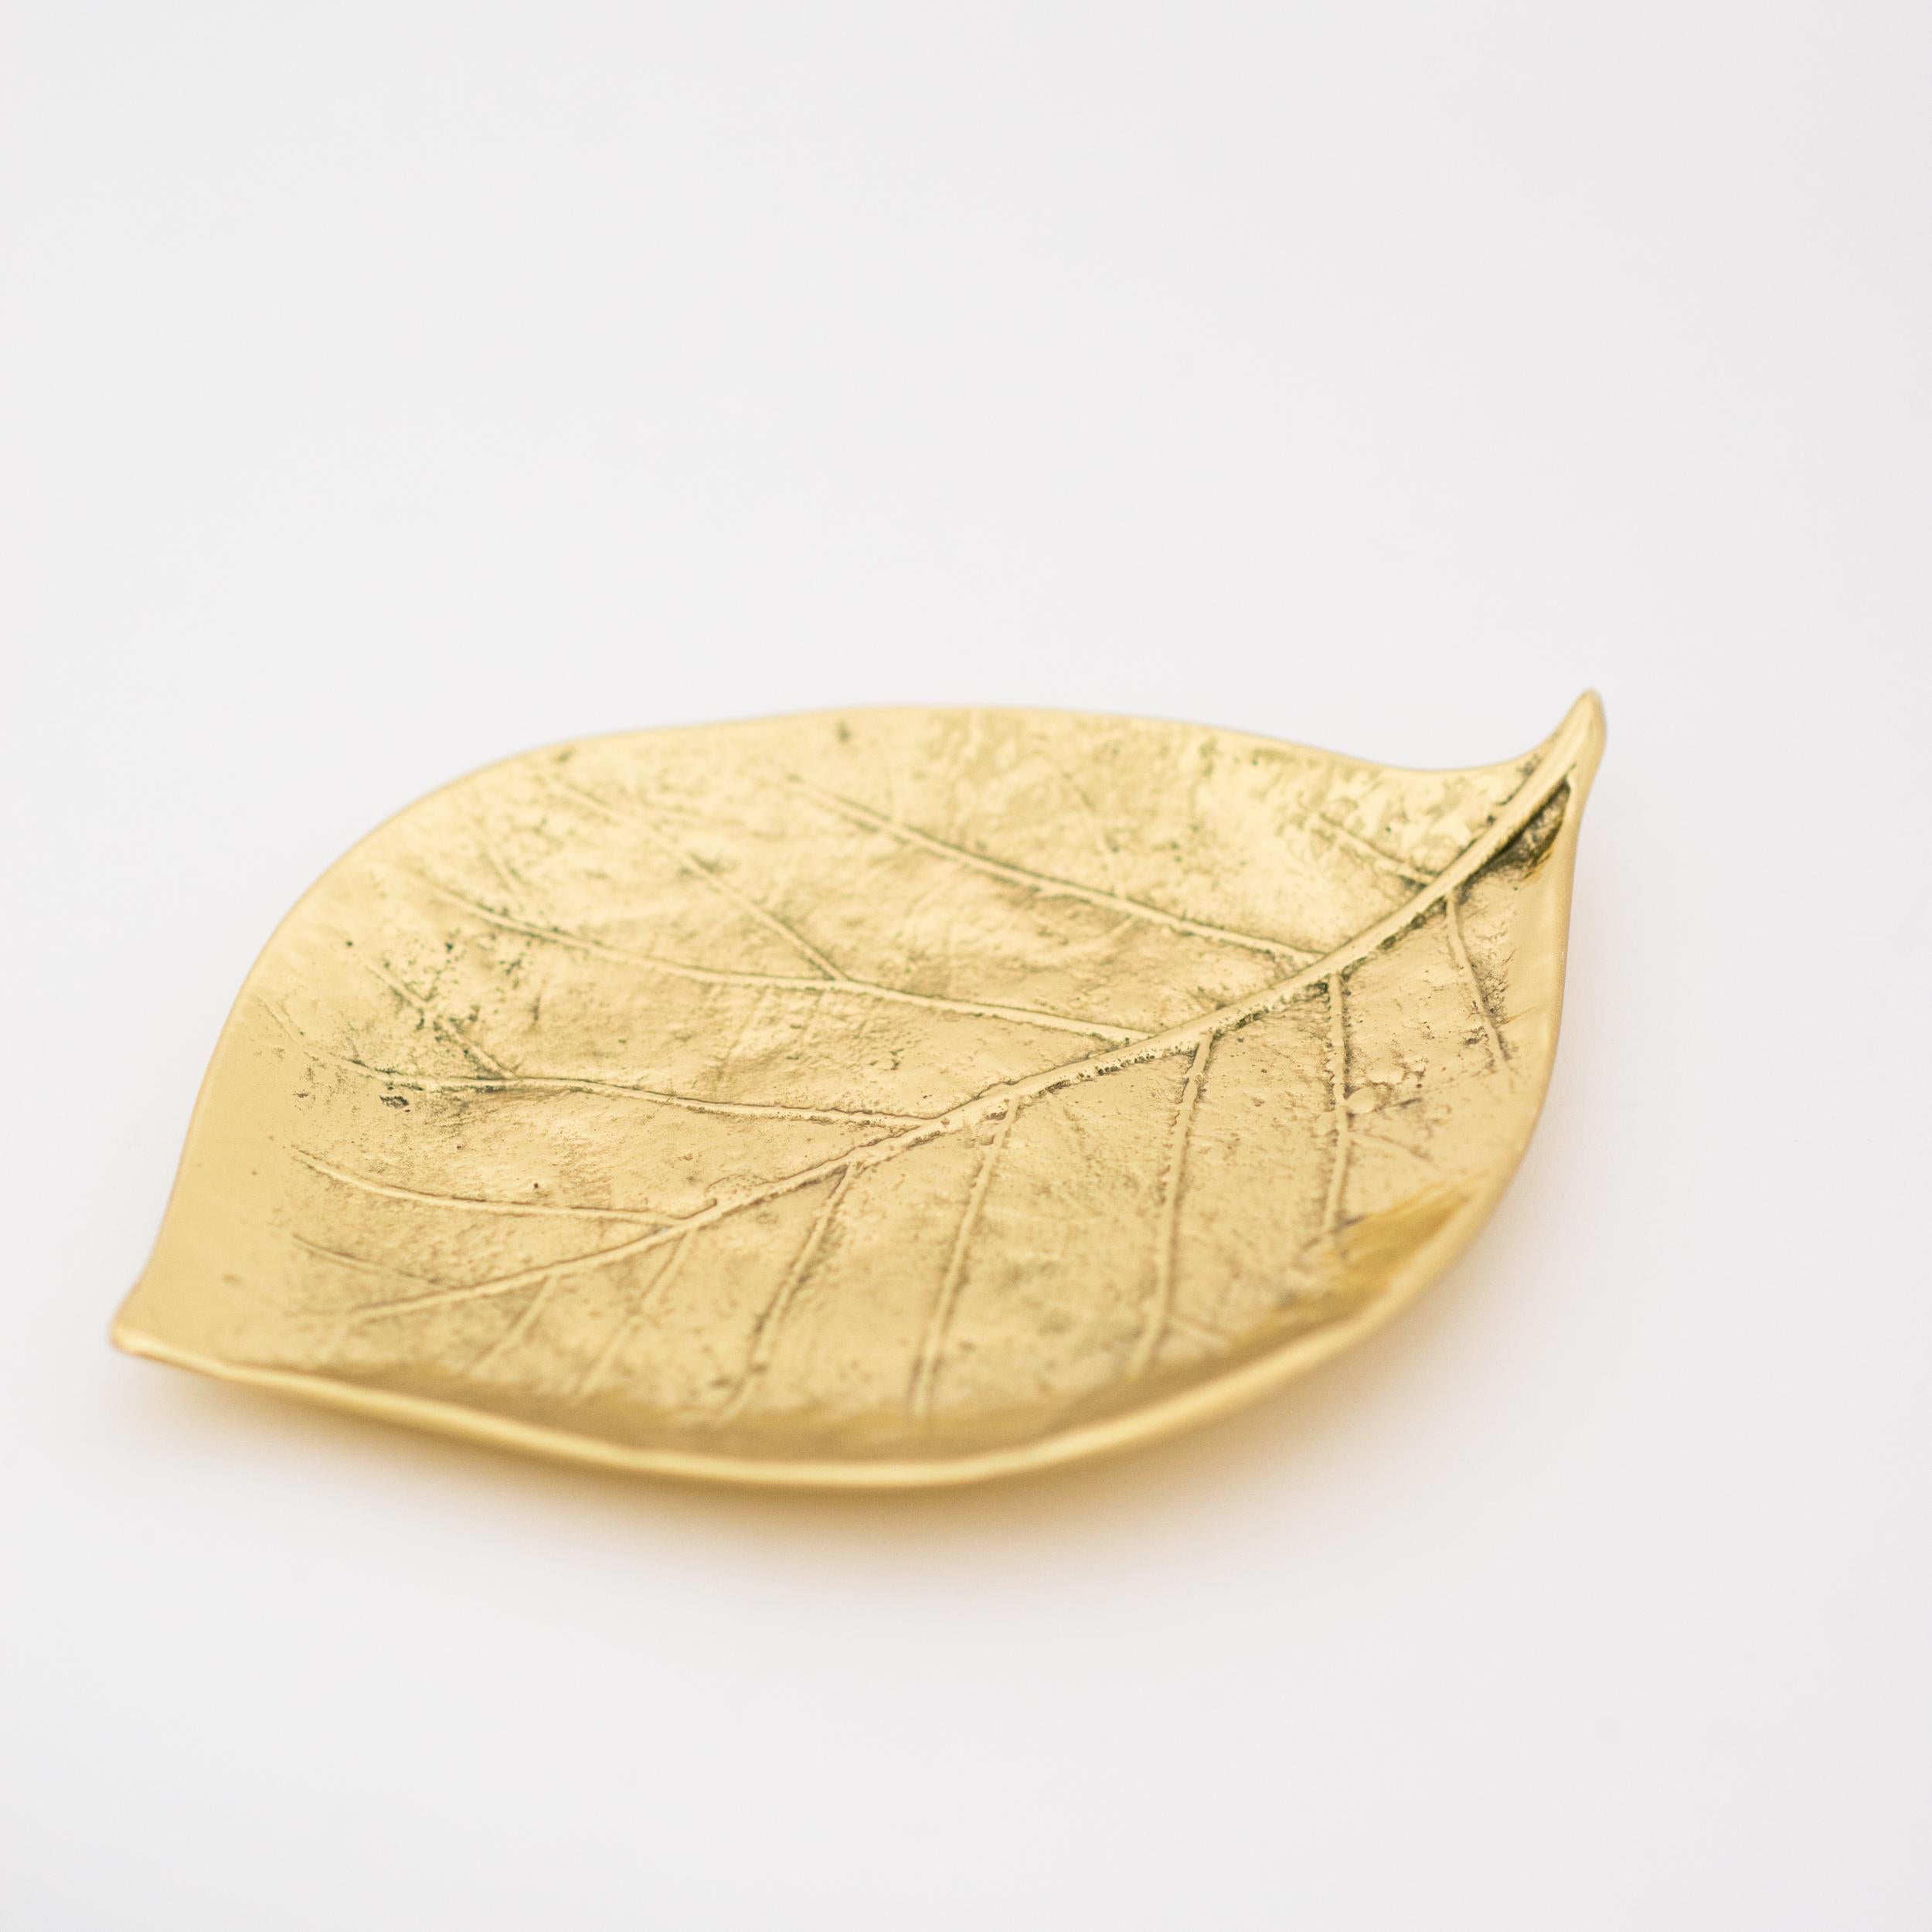 Contemporary Set of 3 Handmade Cast Brass Leaves Decorative Dishes, Vide Poches For Sale